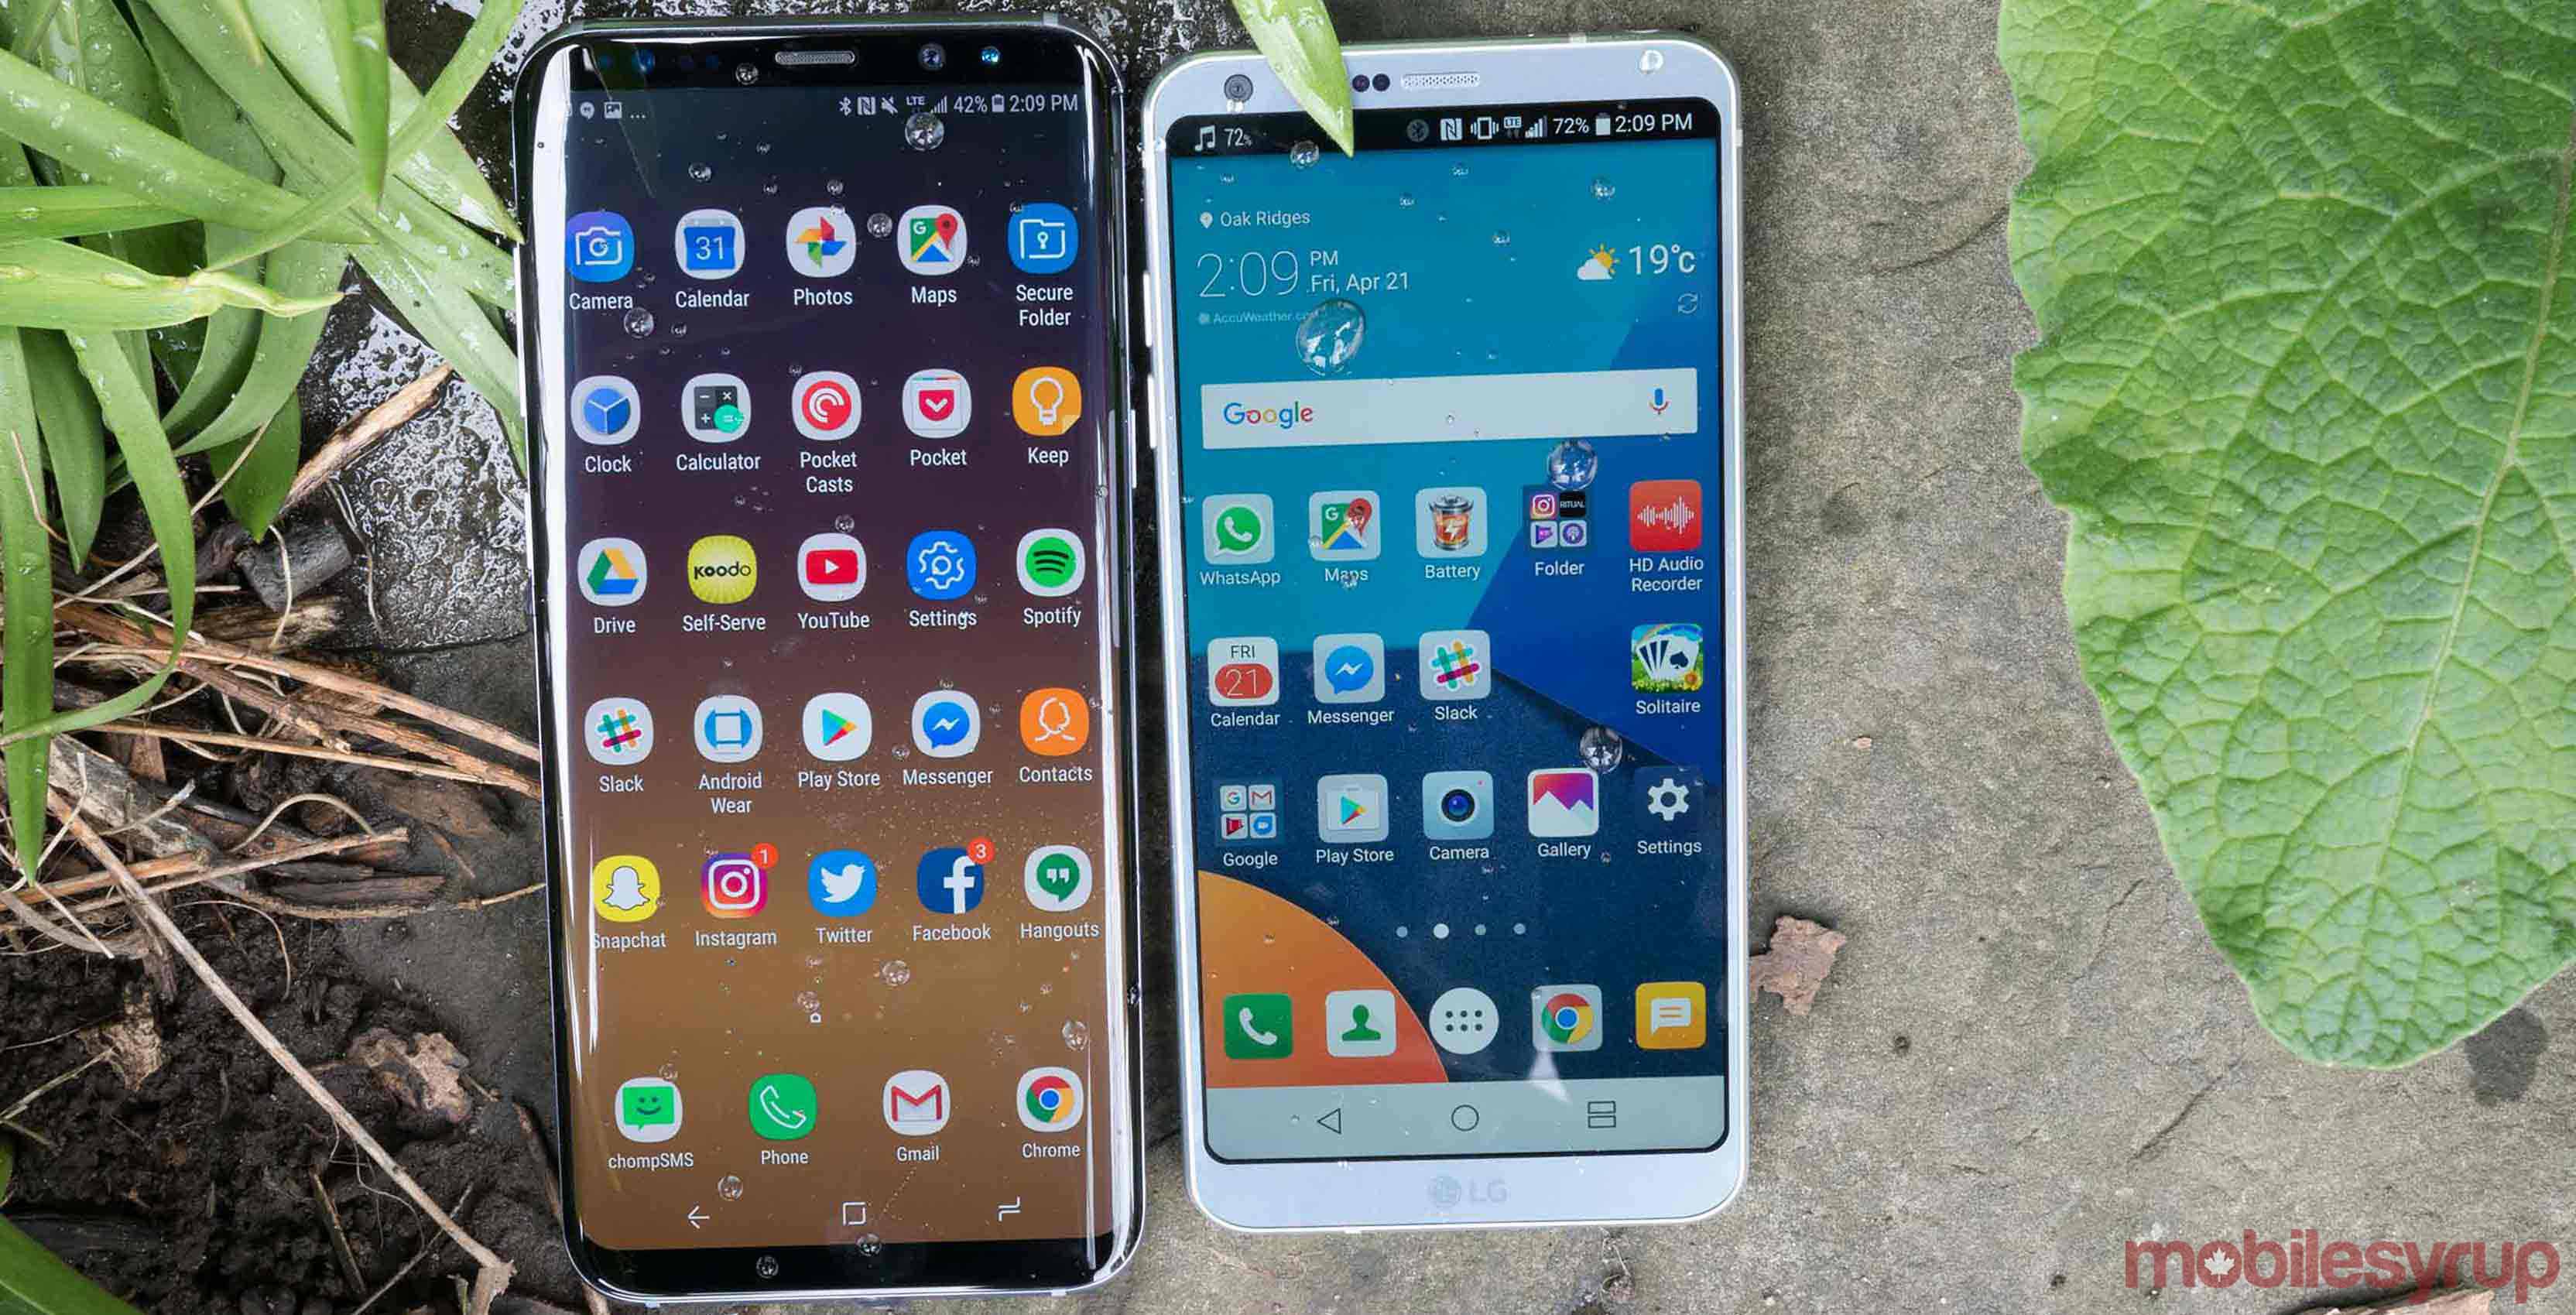 LG G6 and the S8